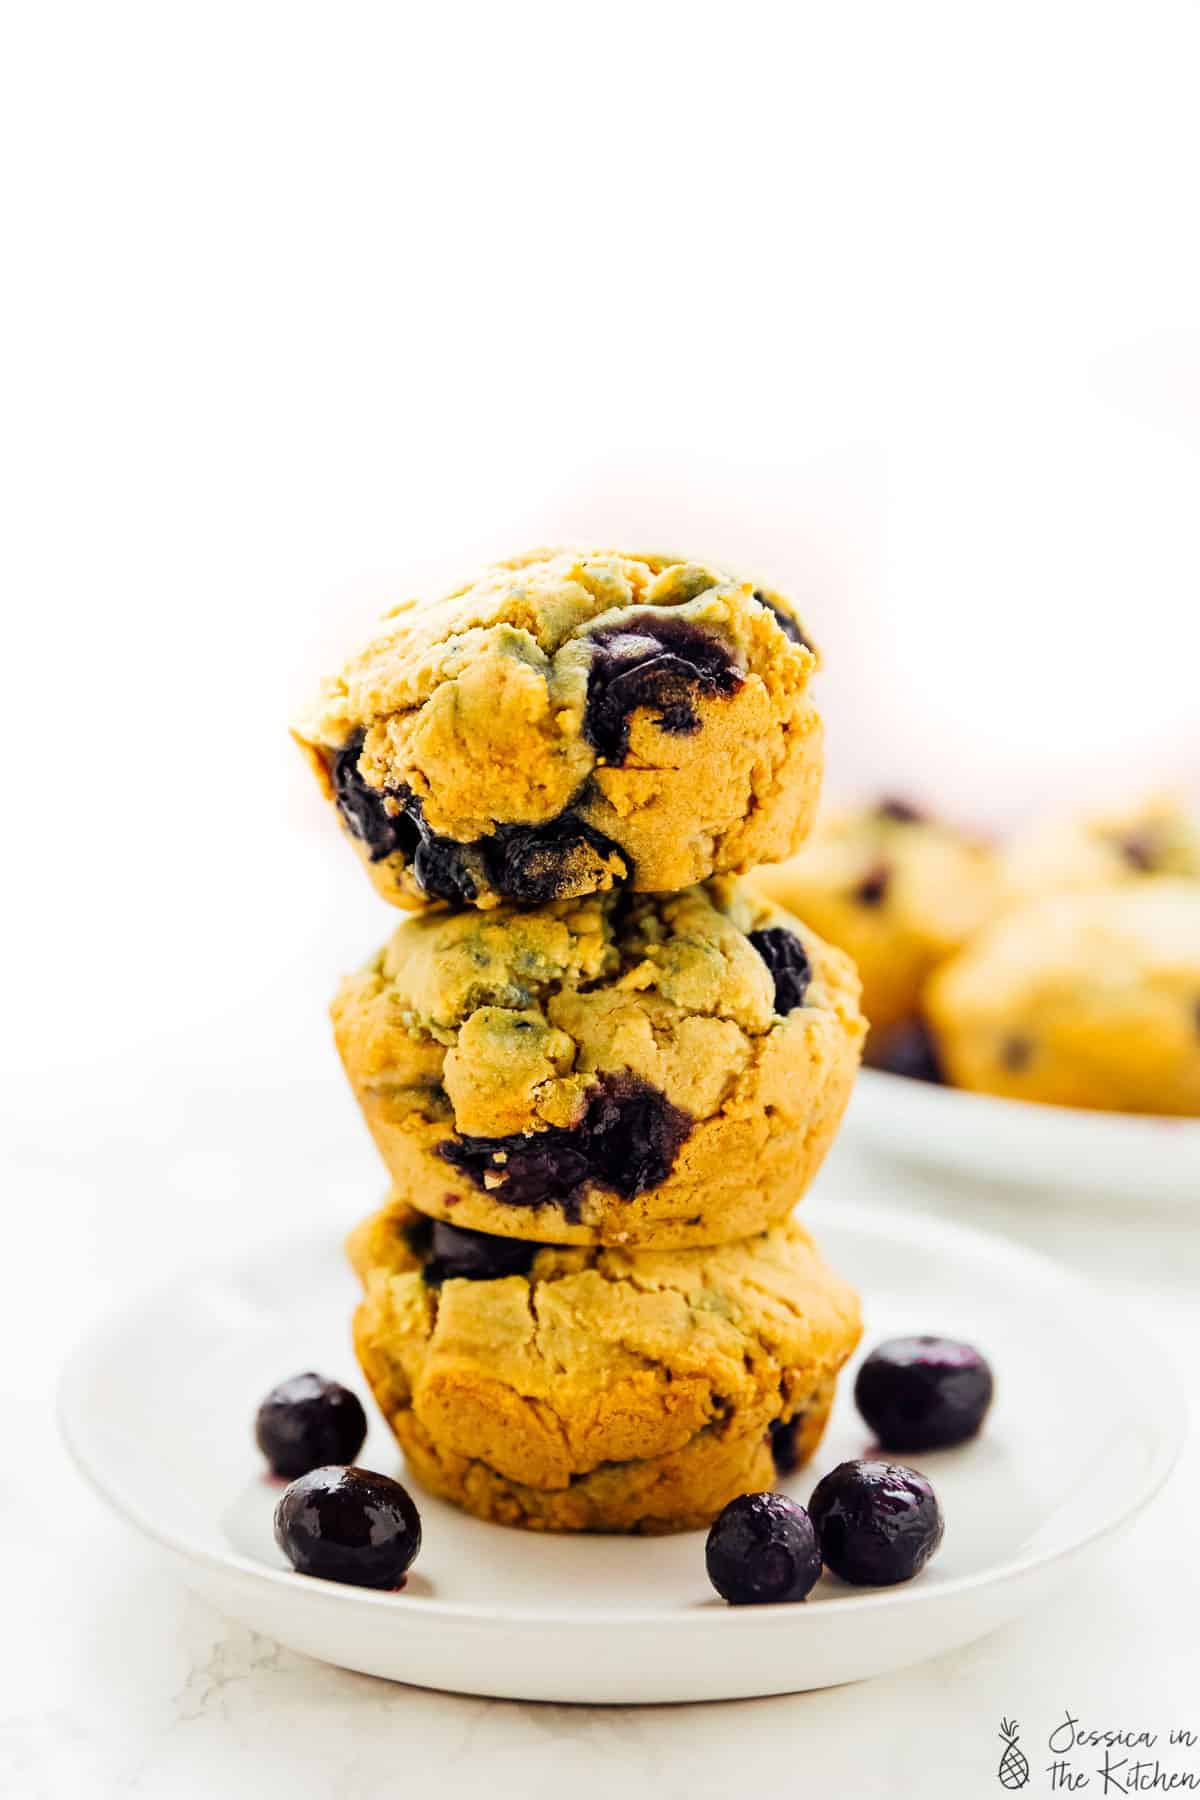 Three vegan blueberry muffins stacked in a plate.